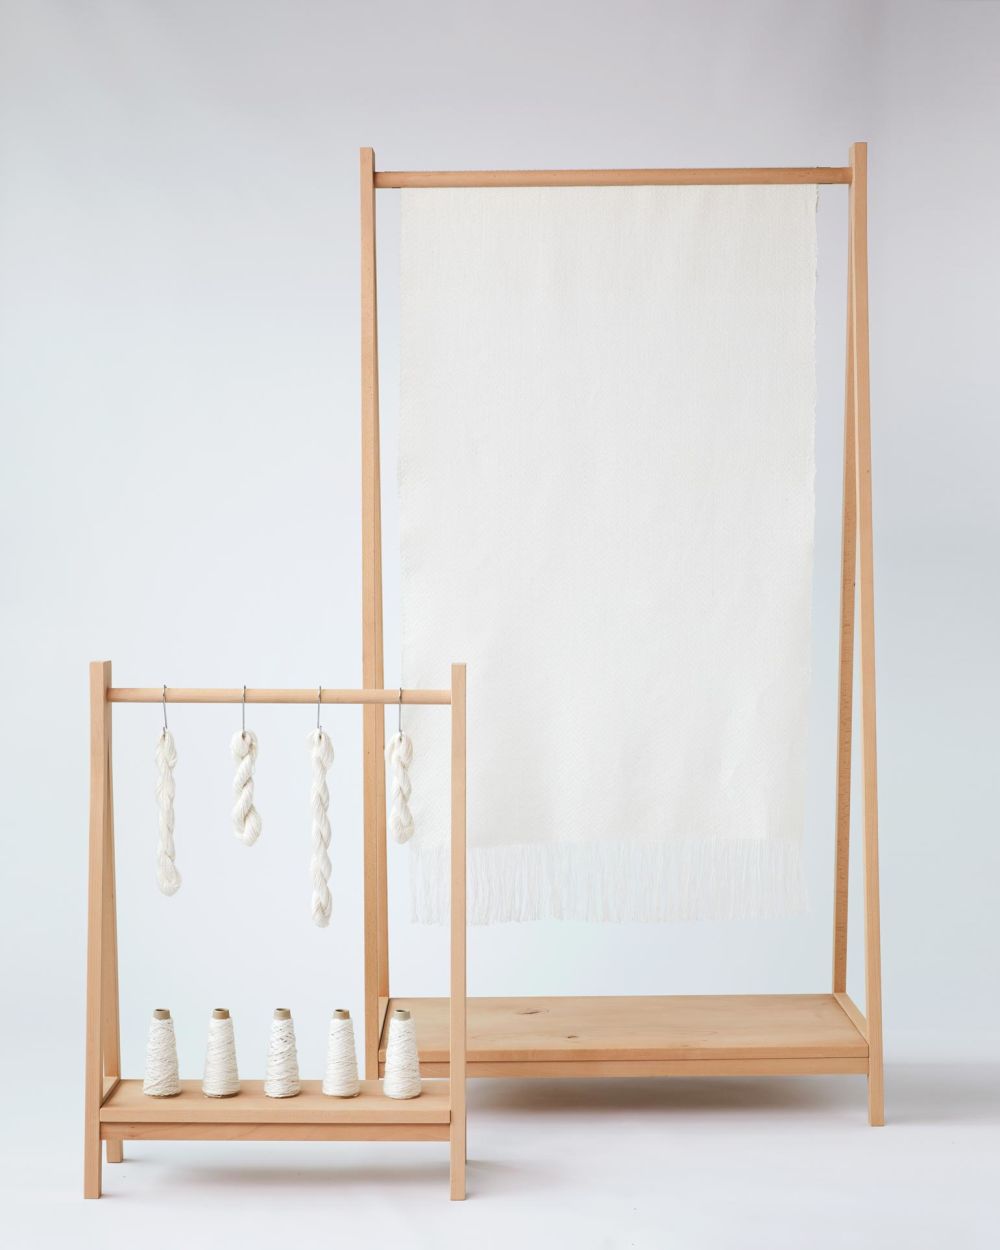 Fabric and thread hanging from wooden frames